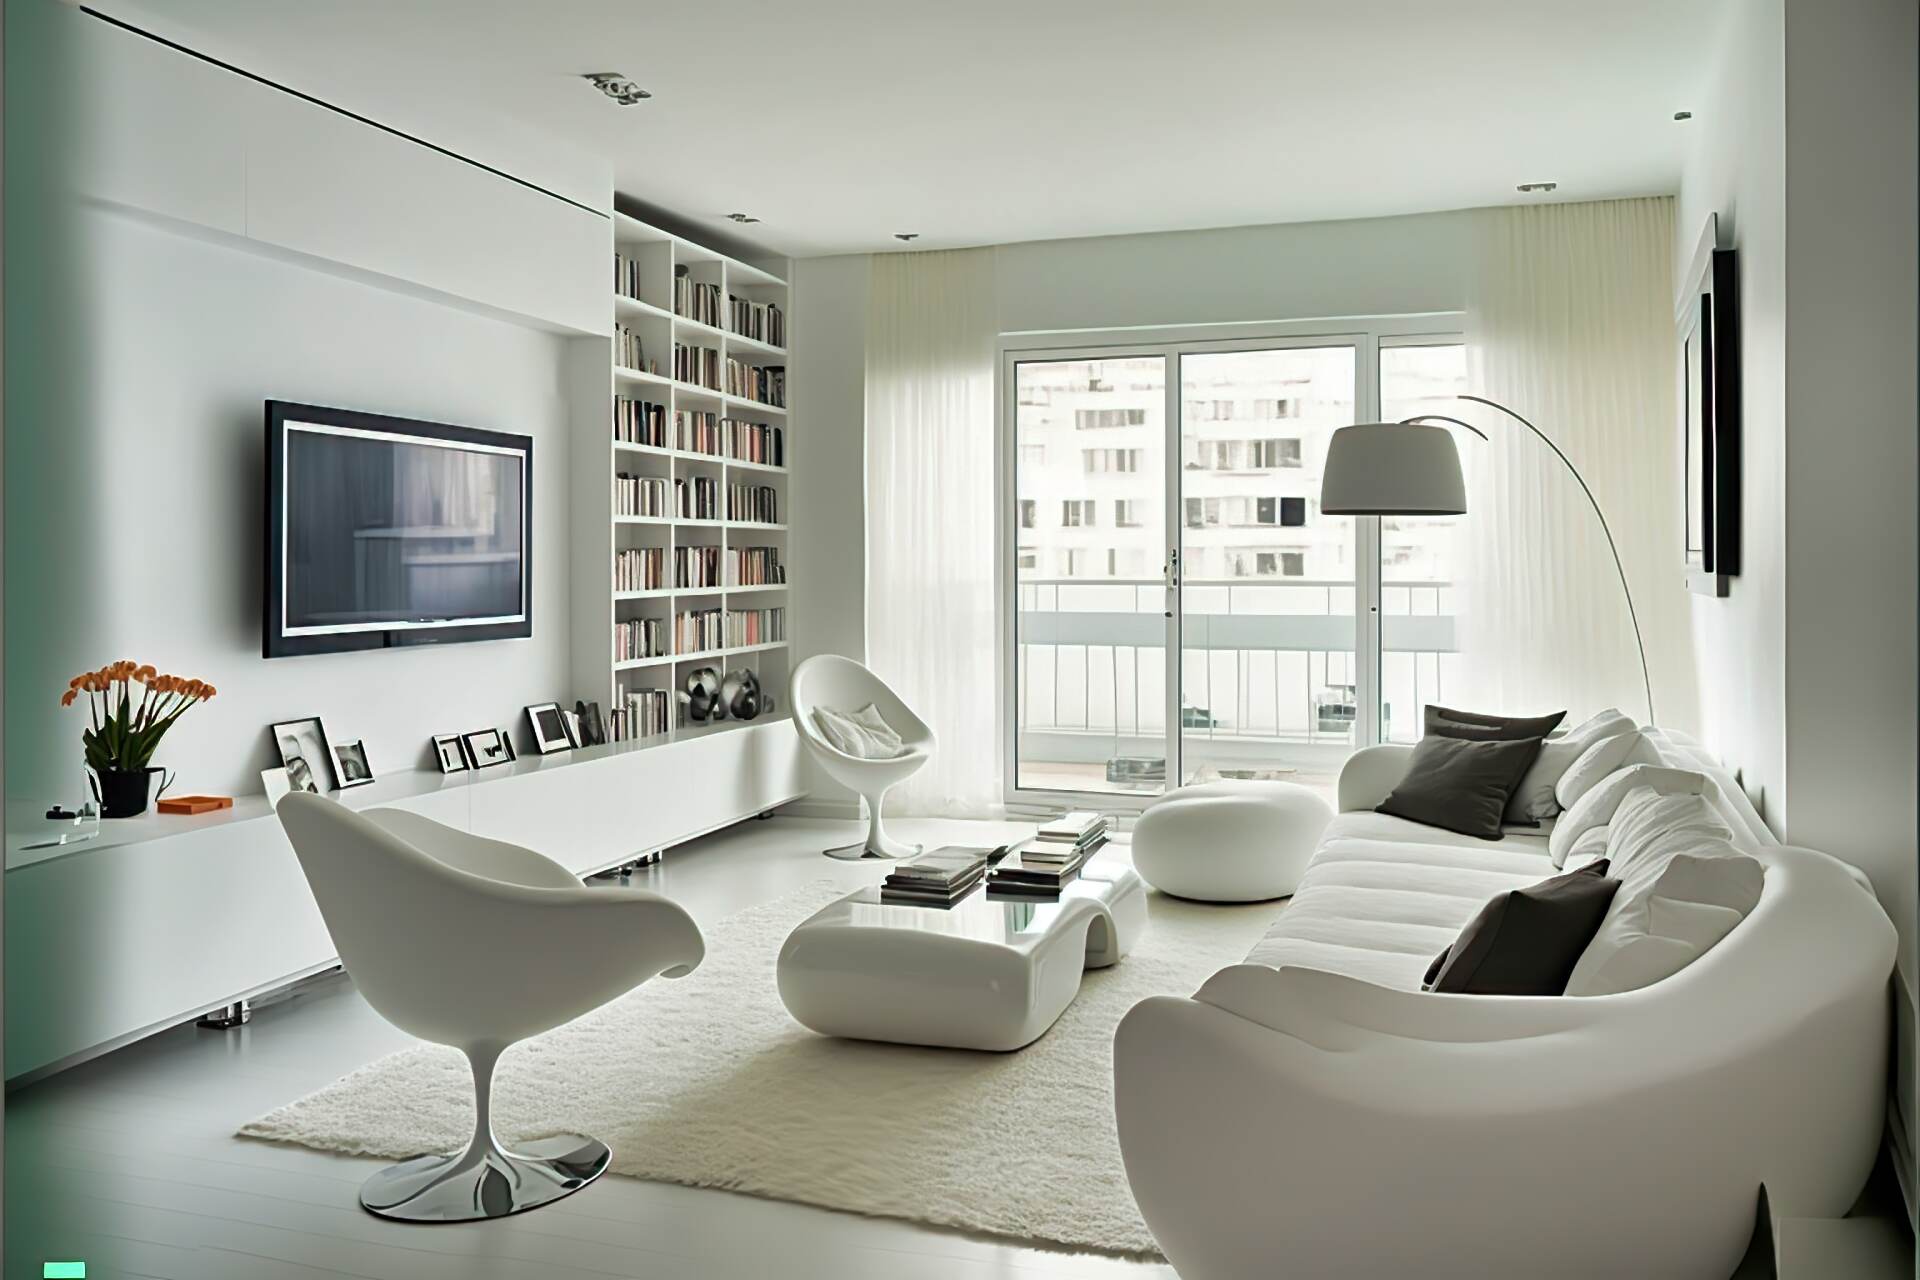 A Light And Airy Living Room With A Futuristic Vibe. The Walls Are Painted A Soft White, With A Large, Flat-Screen Tv Mounted On One Wall. A Sleek, White Sofa Is Paired With Two White Armchairs For Plenty Of Seating. A White Coffee Table And Grey Accent Chair Complete The Look. A Floating Shelf Holds A Selection Of Books And Small Decor Pieces. A White, Modern Chandelier Hangs From The Ceiling, Adding A Touch Of Glamour.